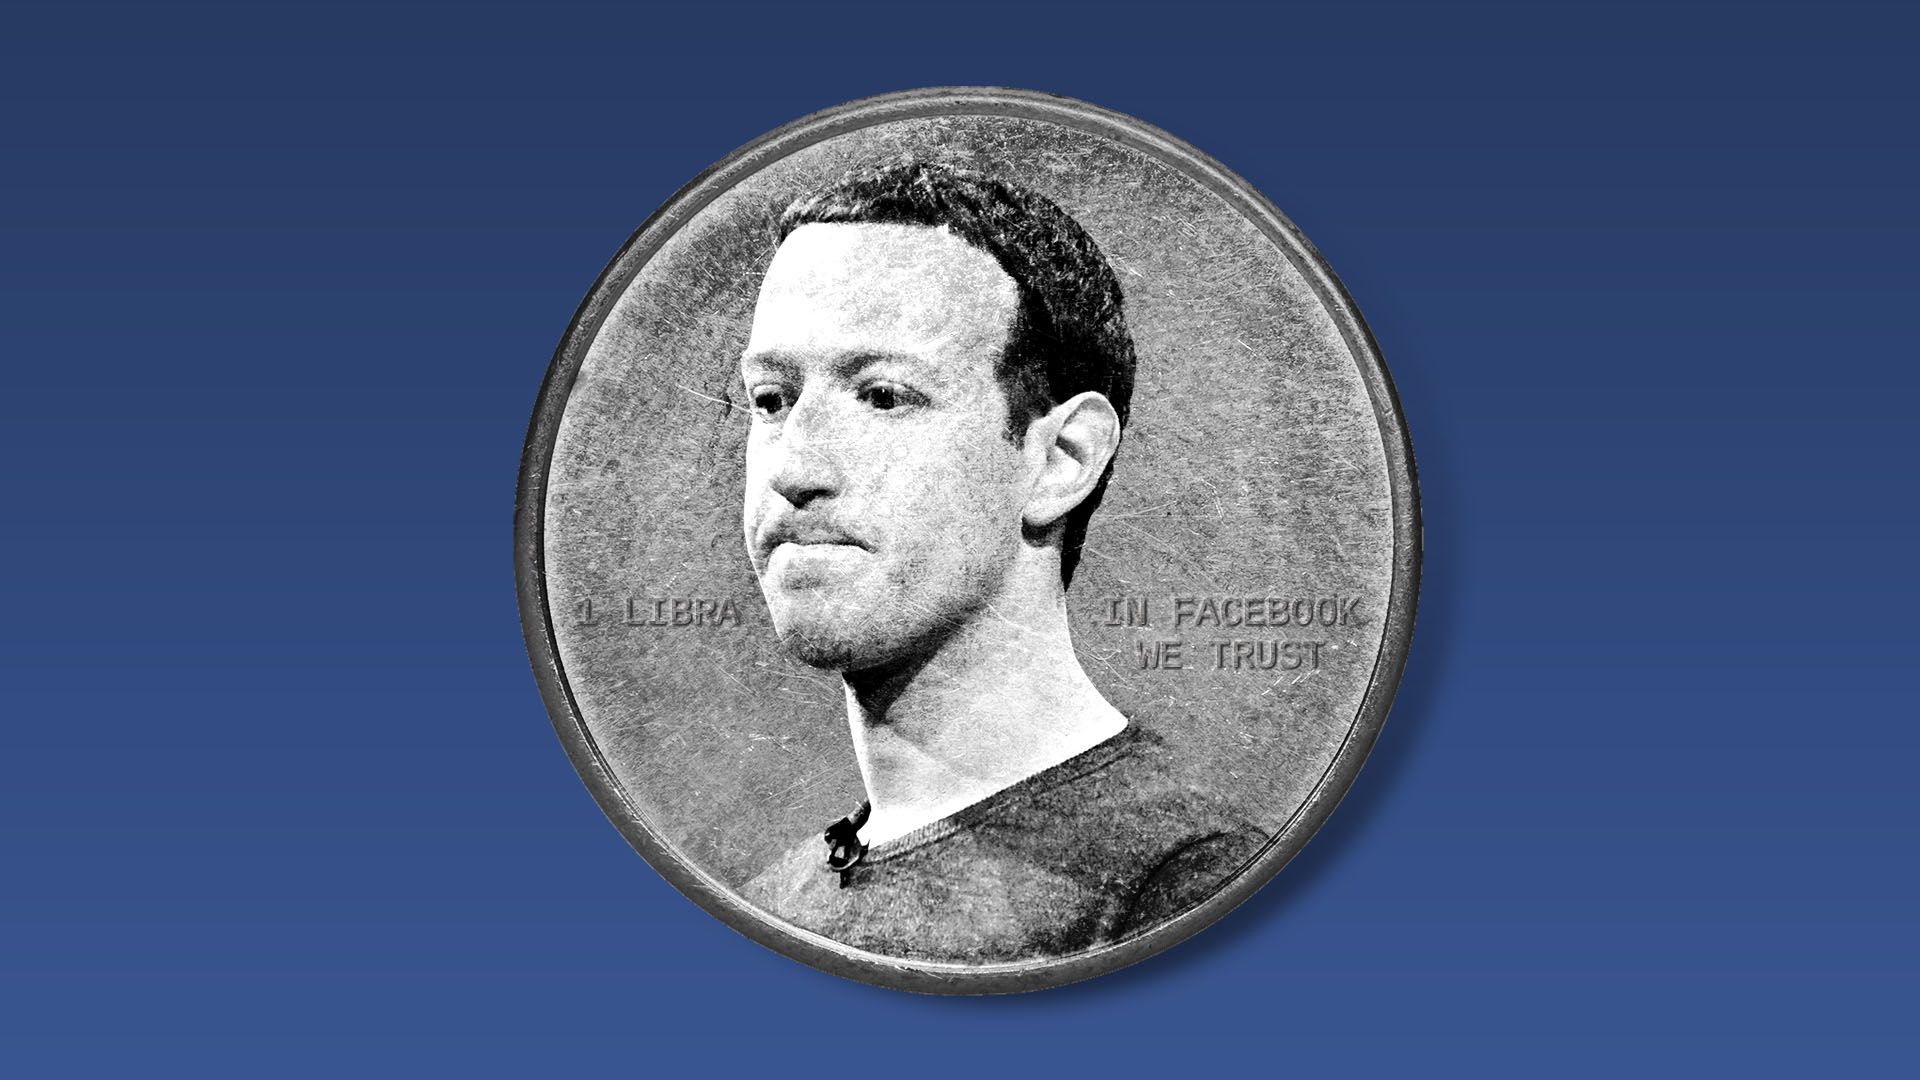 Illustration of a worried Mark Zuckerberg on a coin